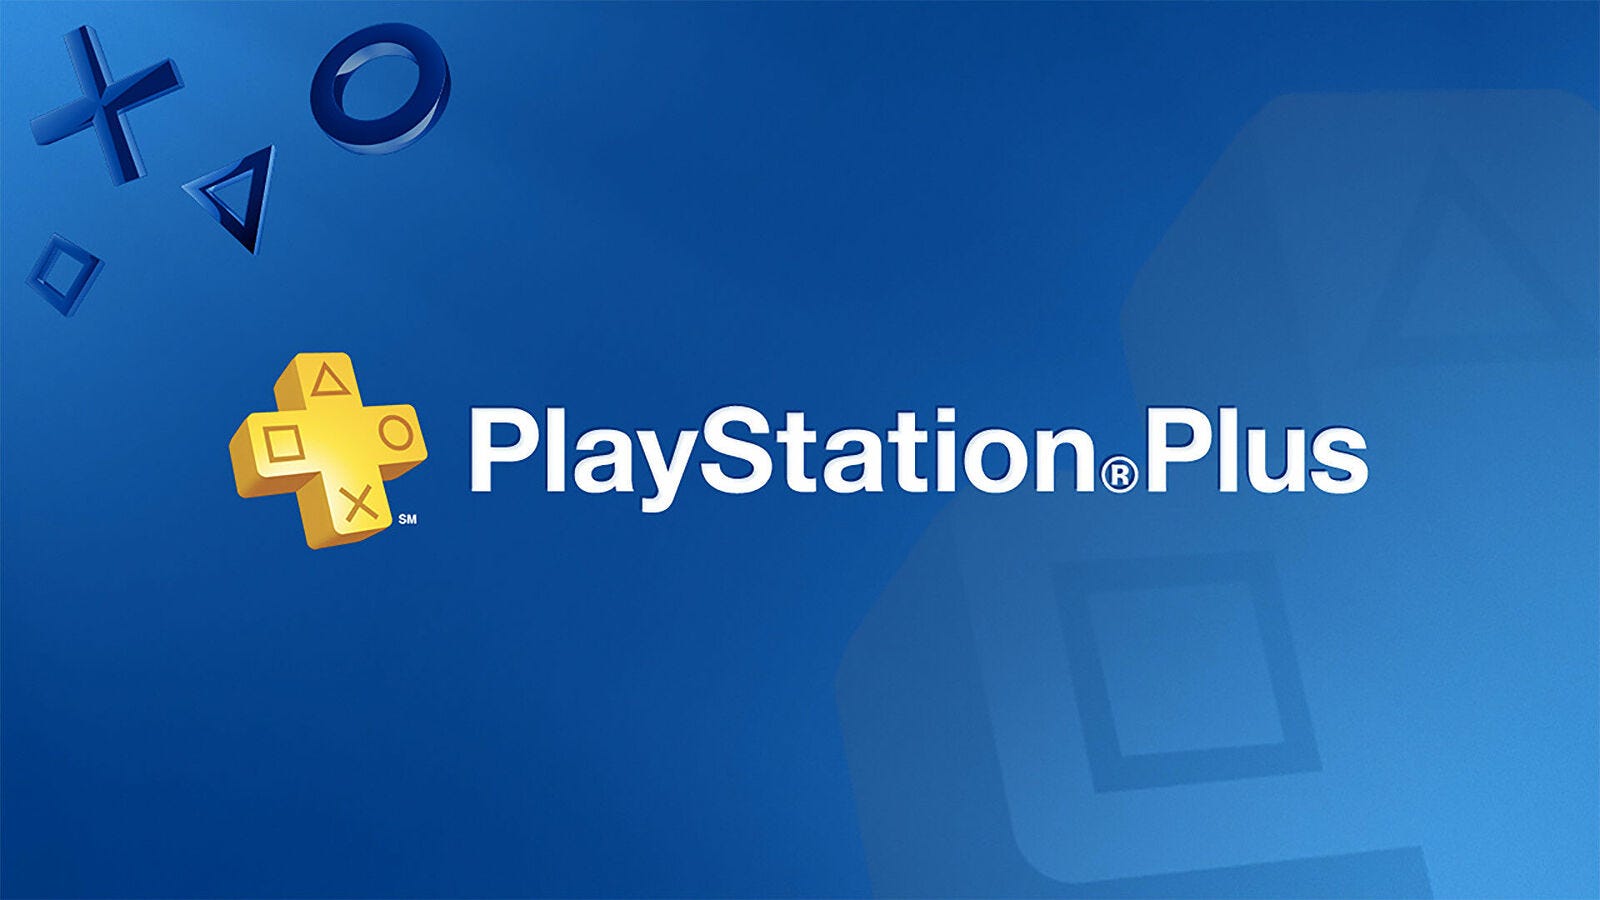 PS Plus online multiplayer is free for everyone this weekend